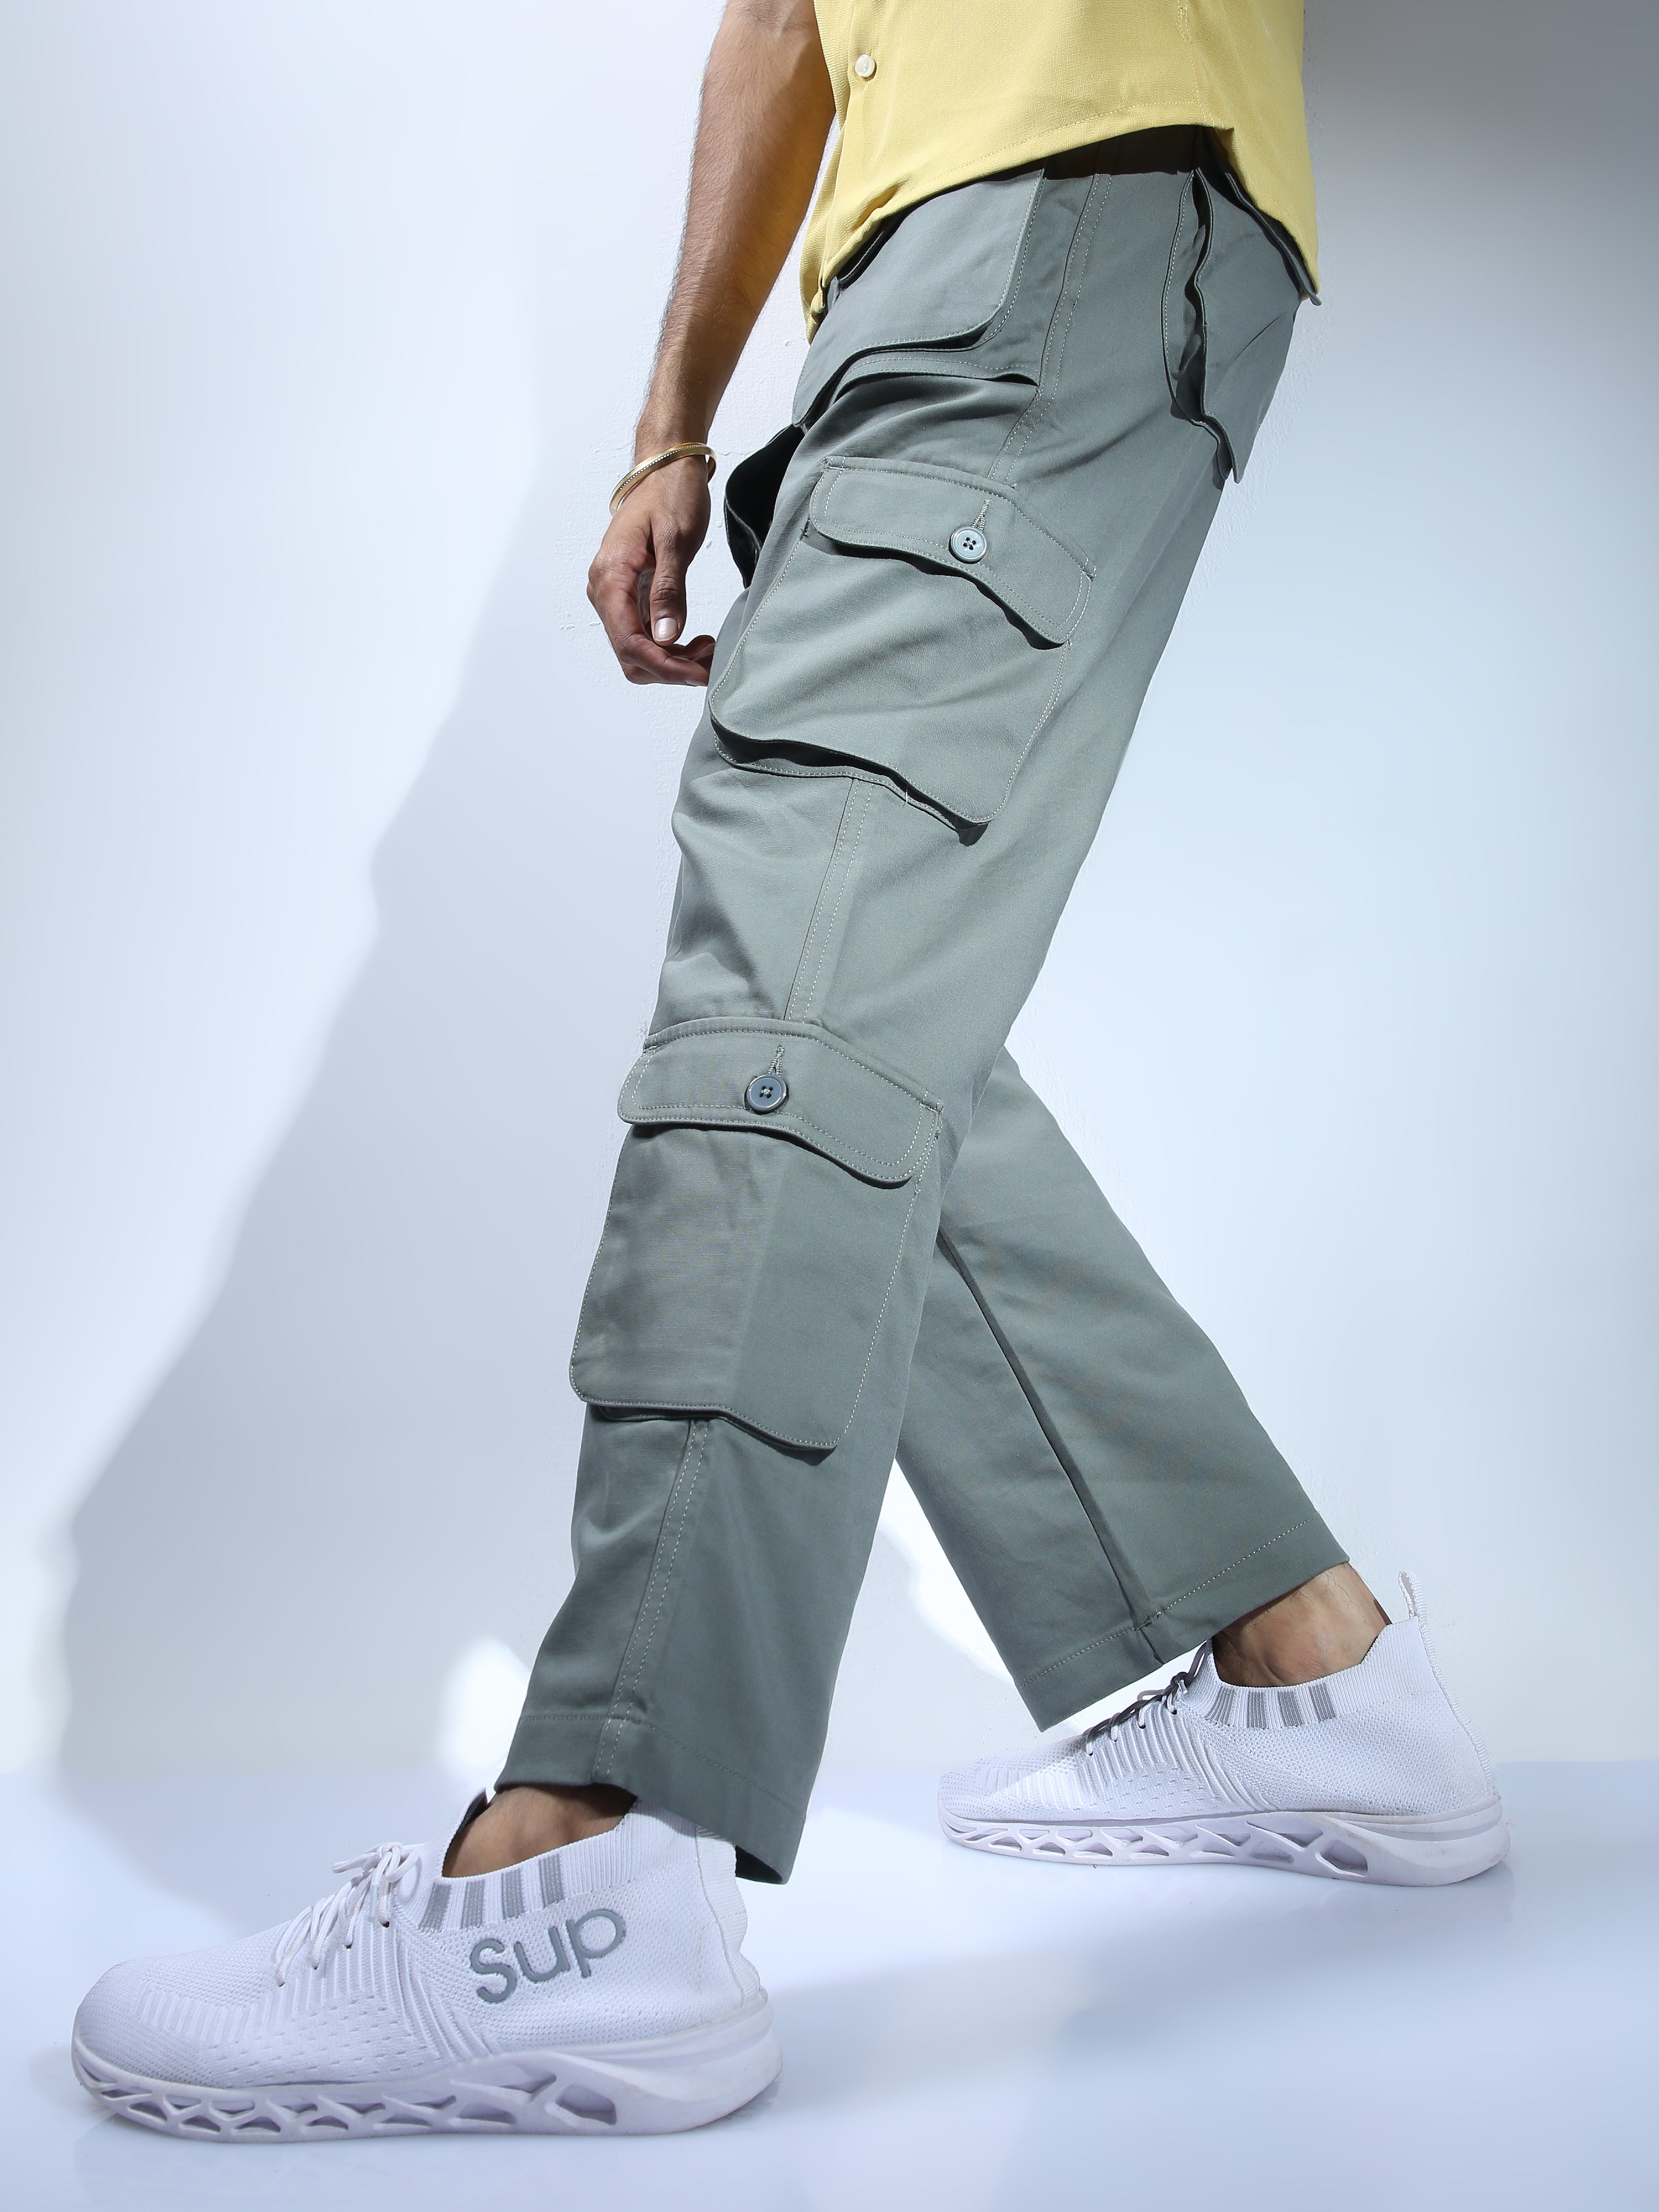 Men Letter Patched Cargo Pants | Cool outfits for men, Grey cargo pants, Cargo  pants outfit men